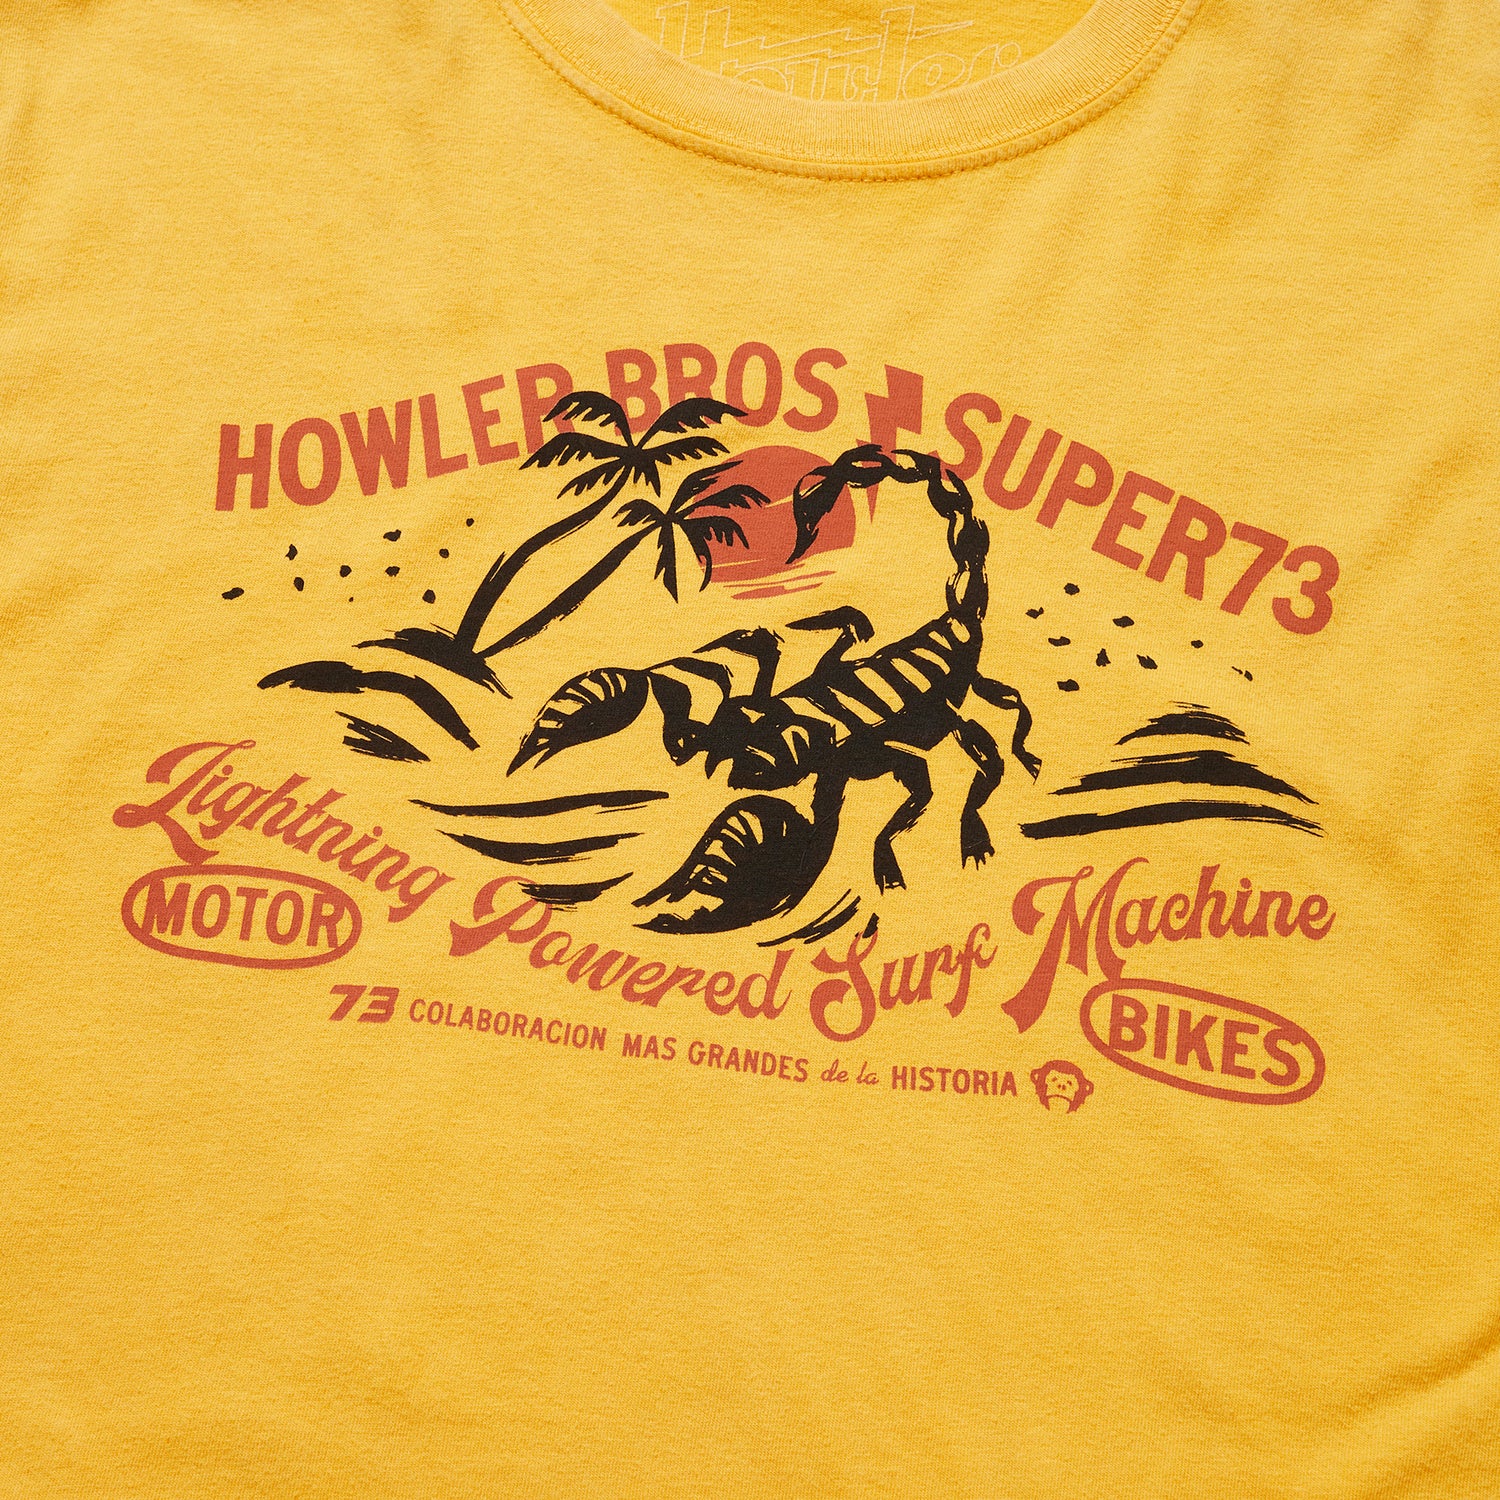 Howler Brothers x Super73 Cotton T-Shirt